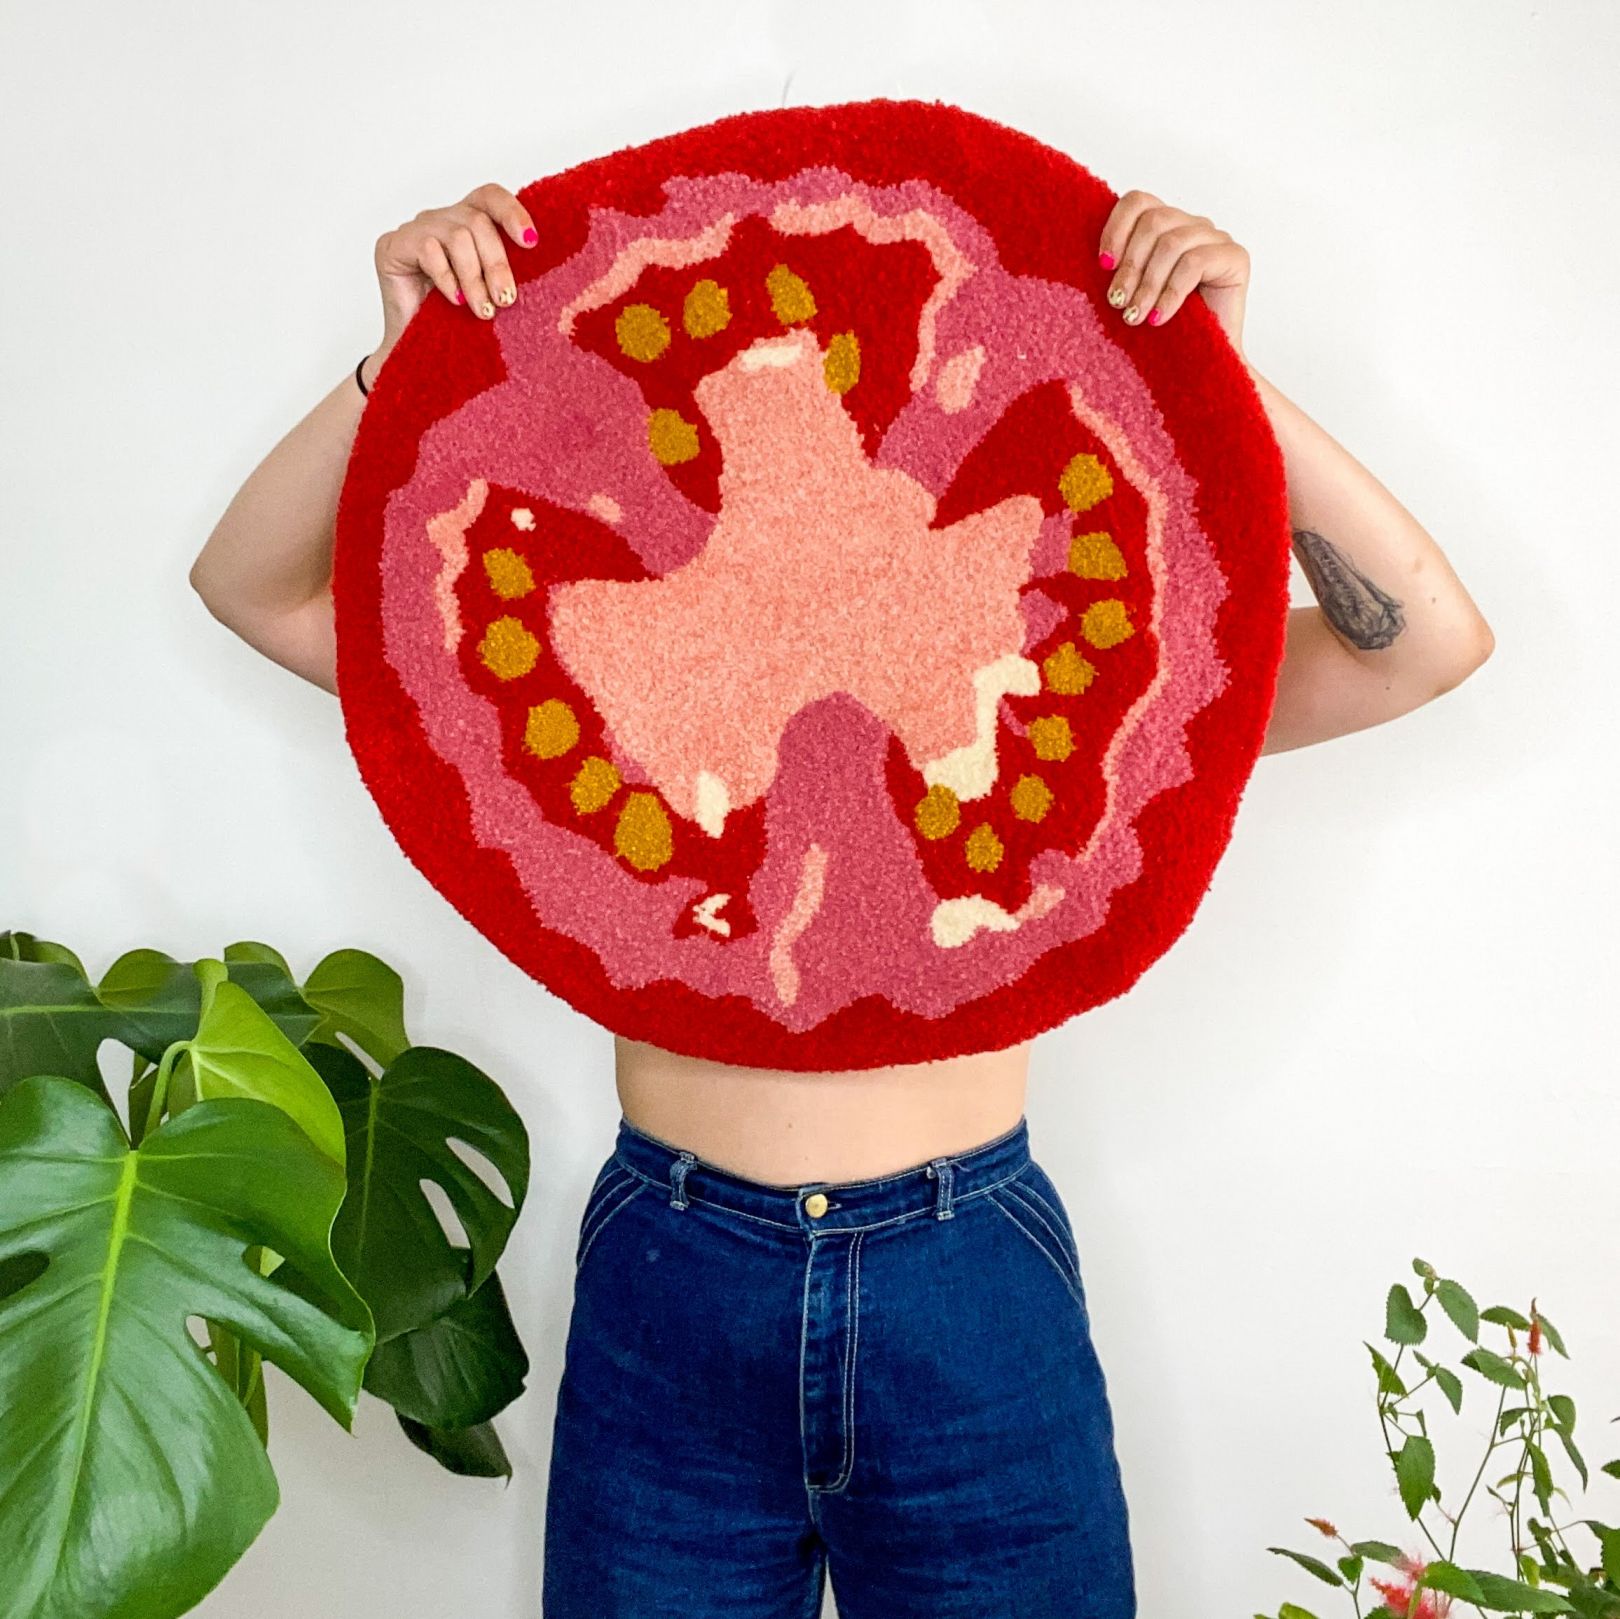 hand-hooked rugs and wall hangings of cheeky candy, cocktails and citrus fruit by Hanna Eidson